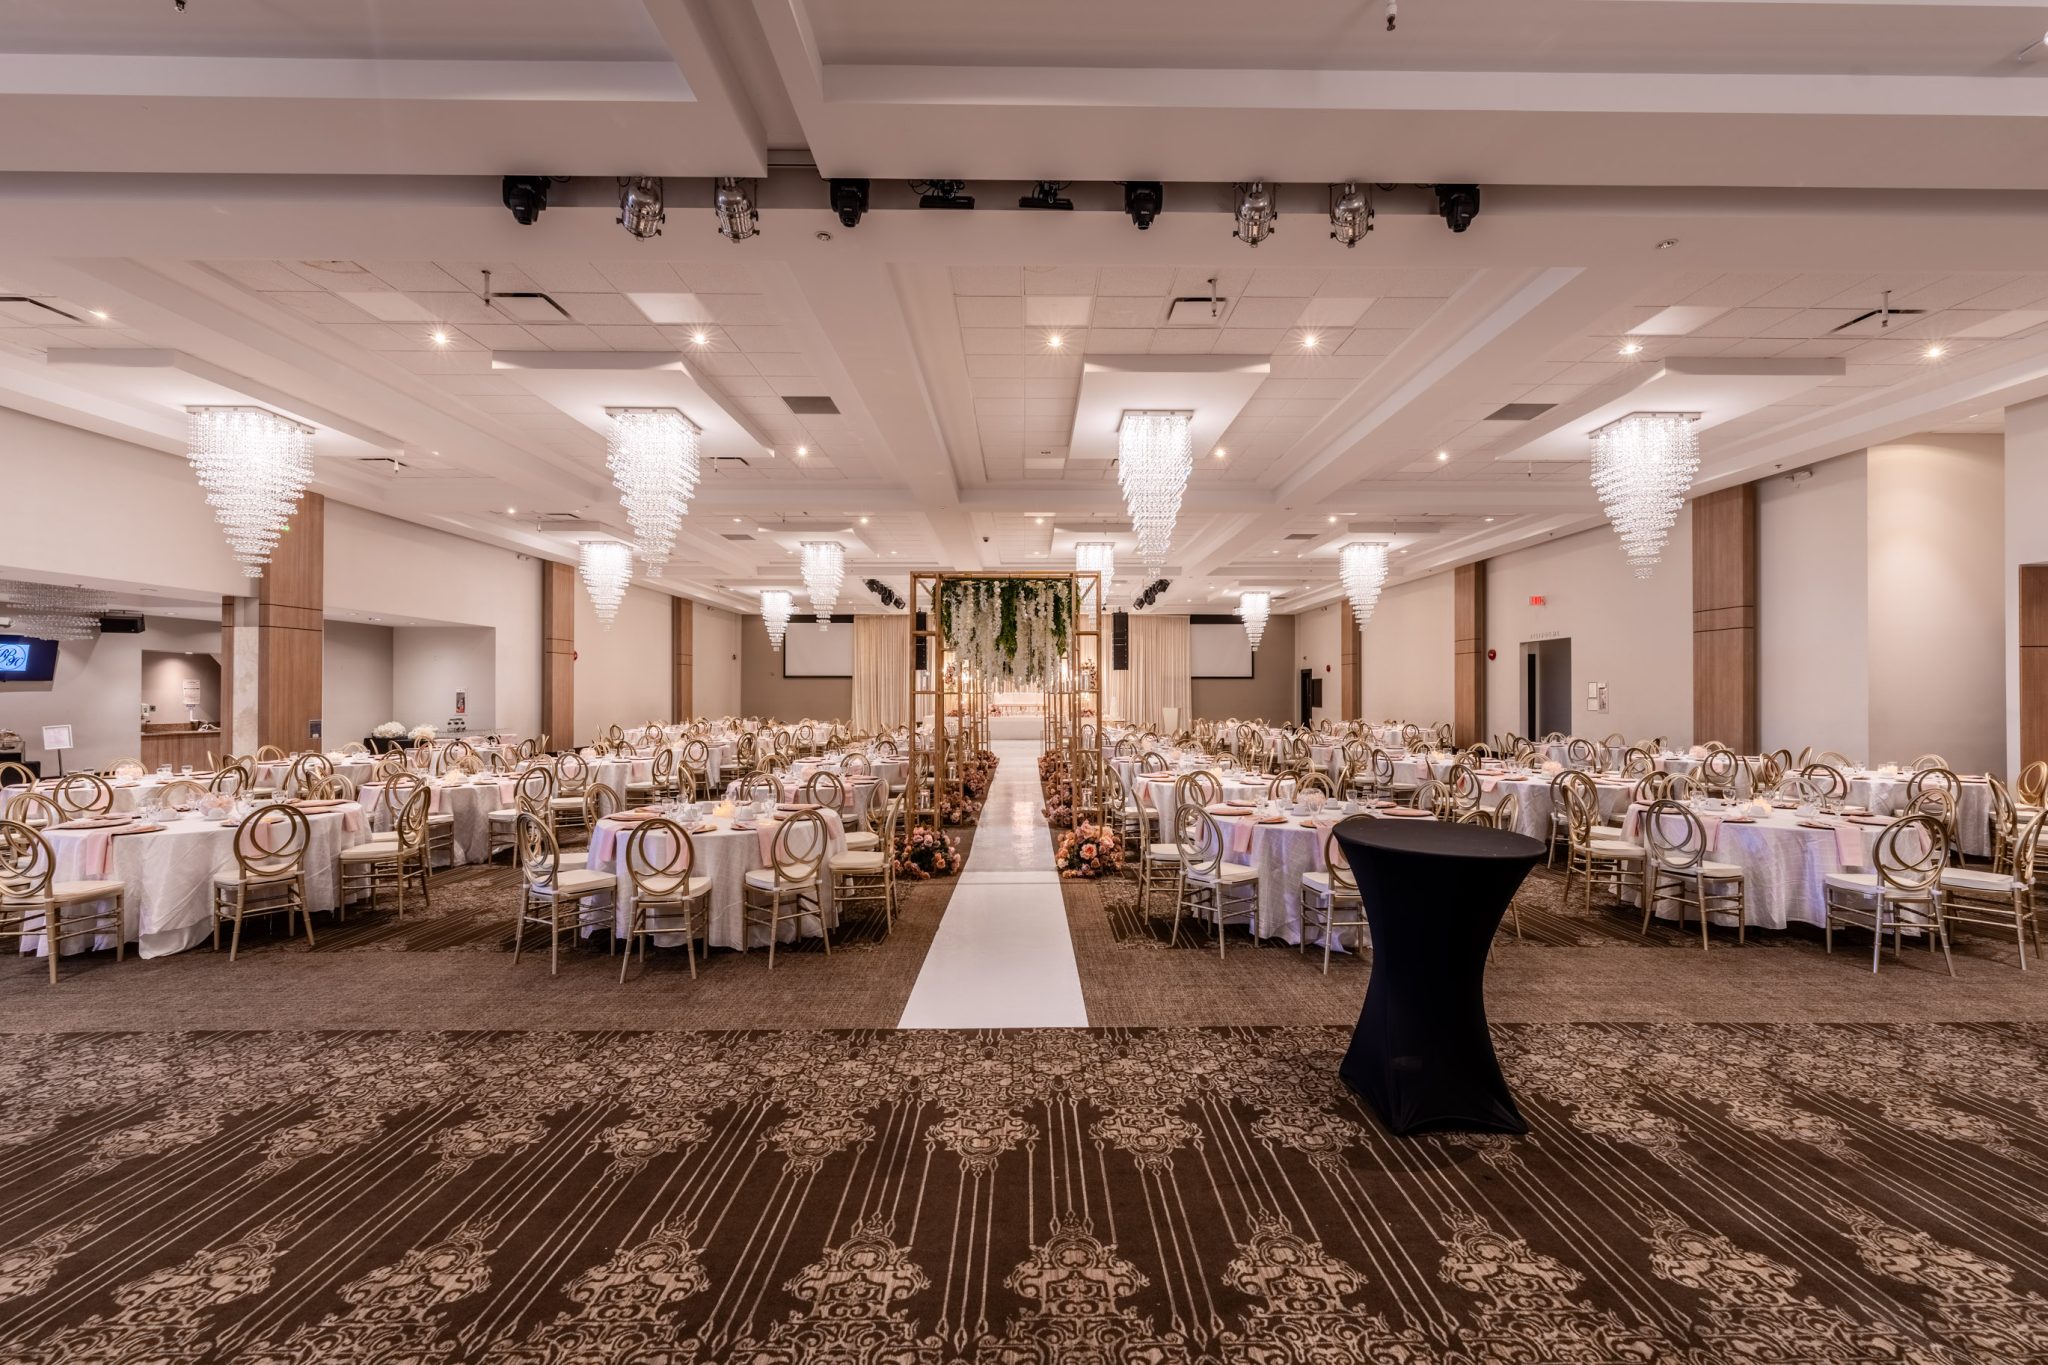 Reception center aisle to stage view